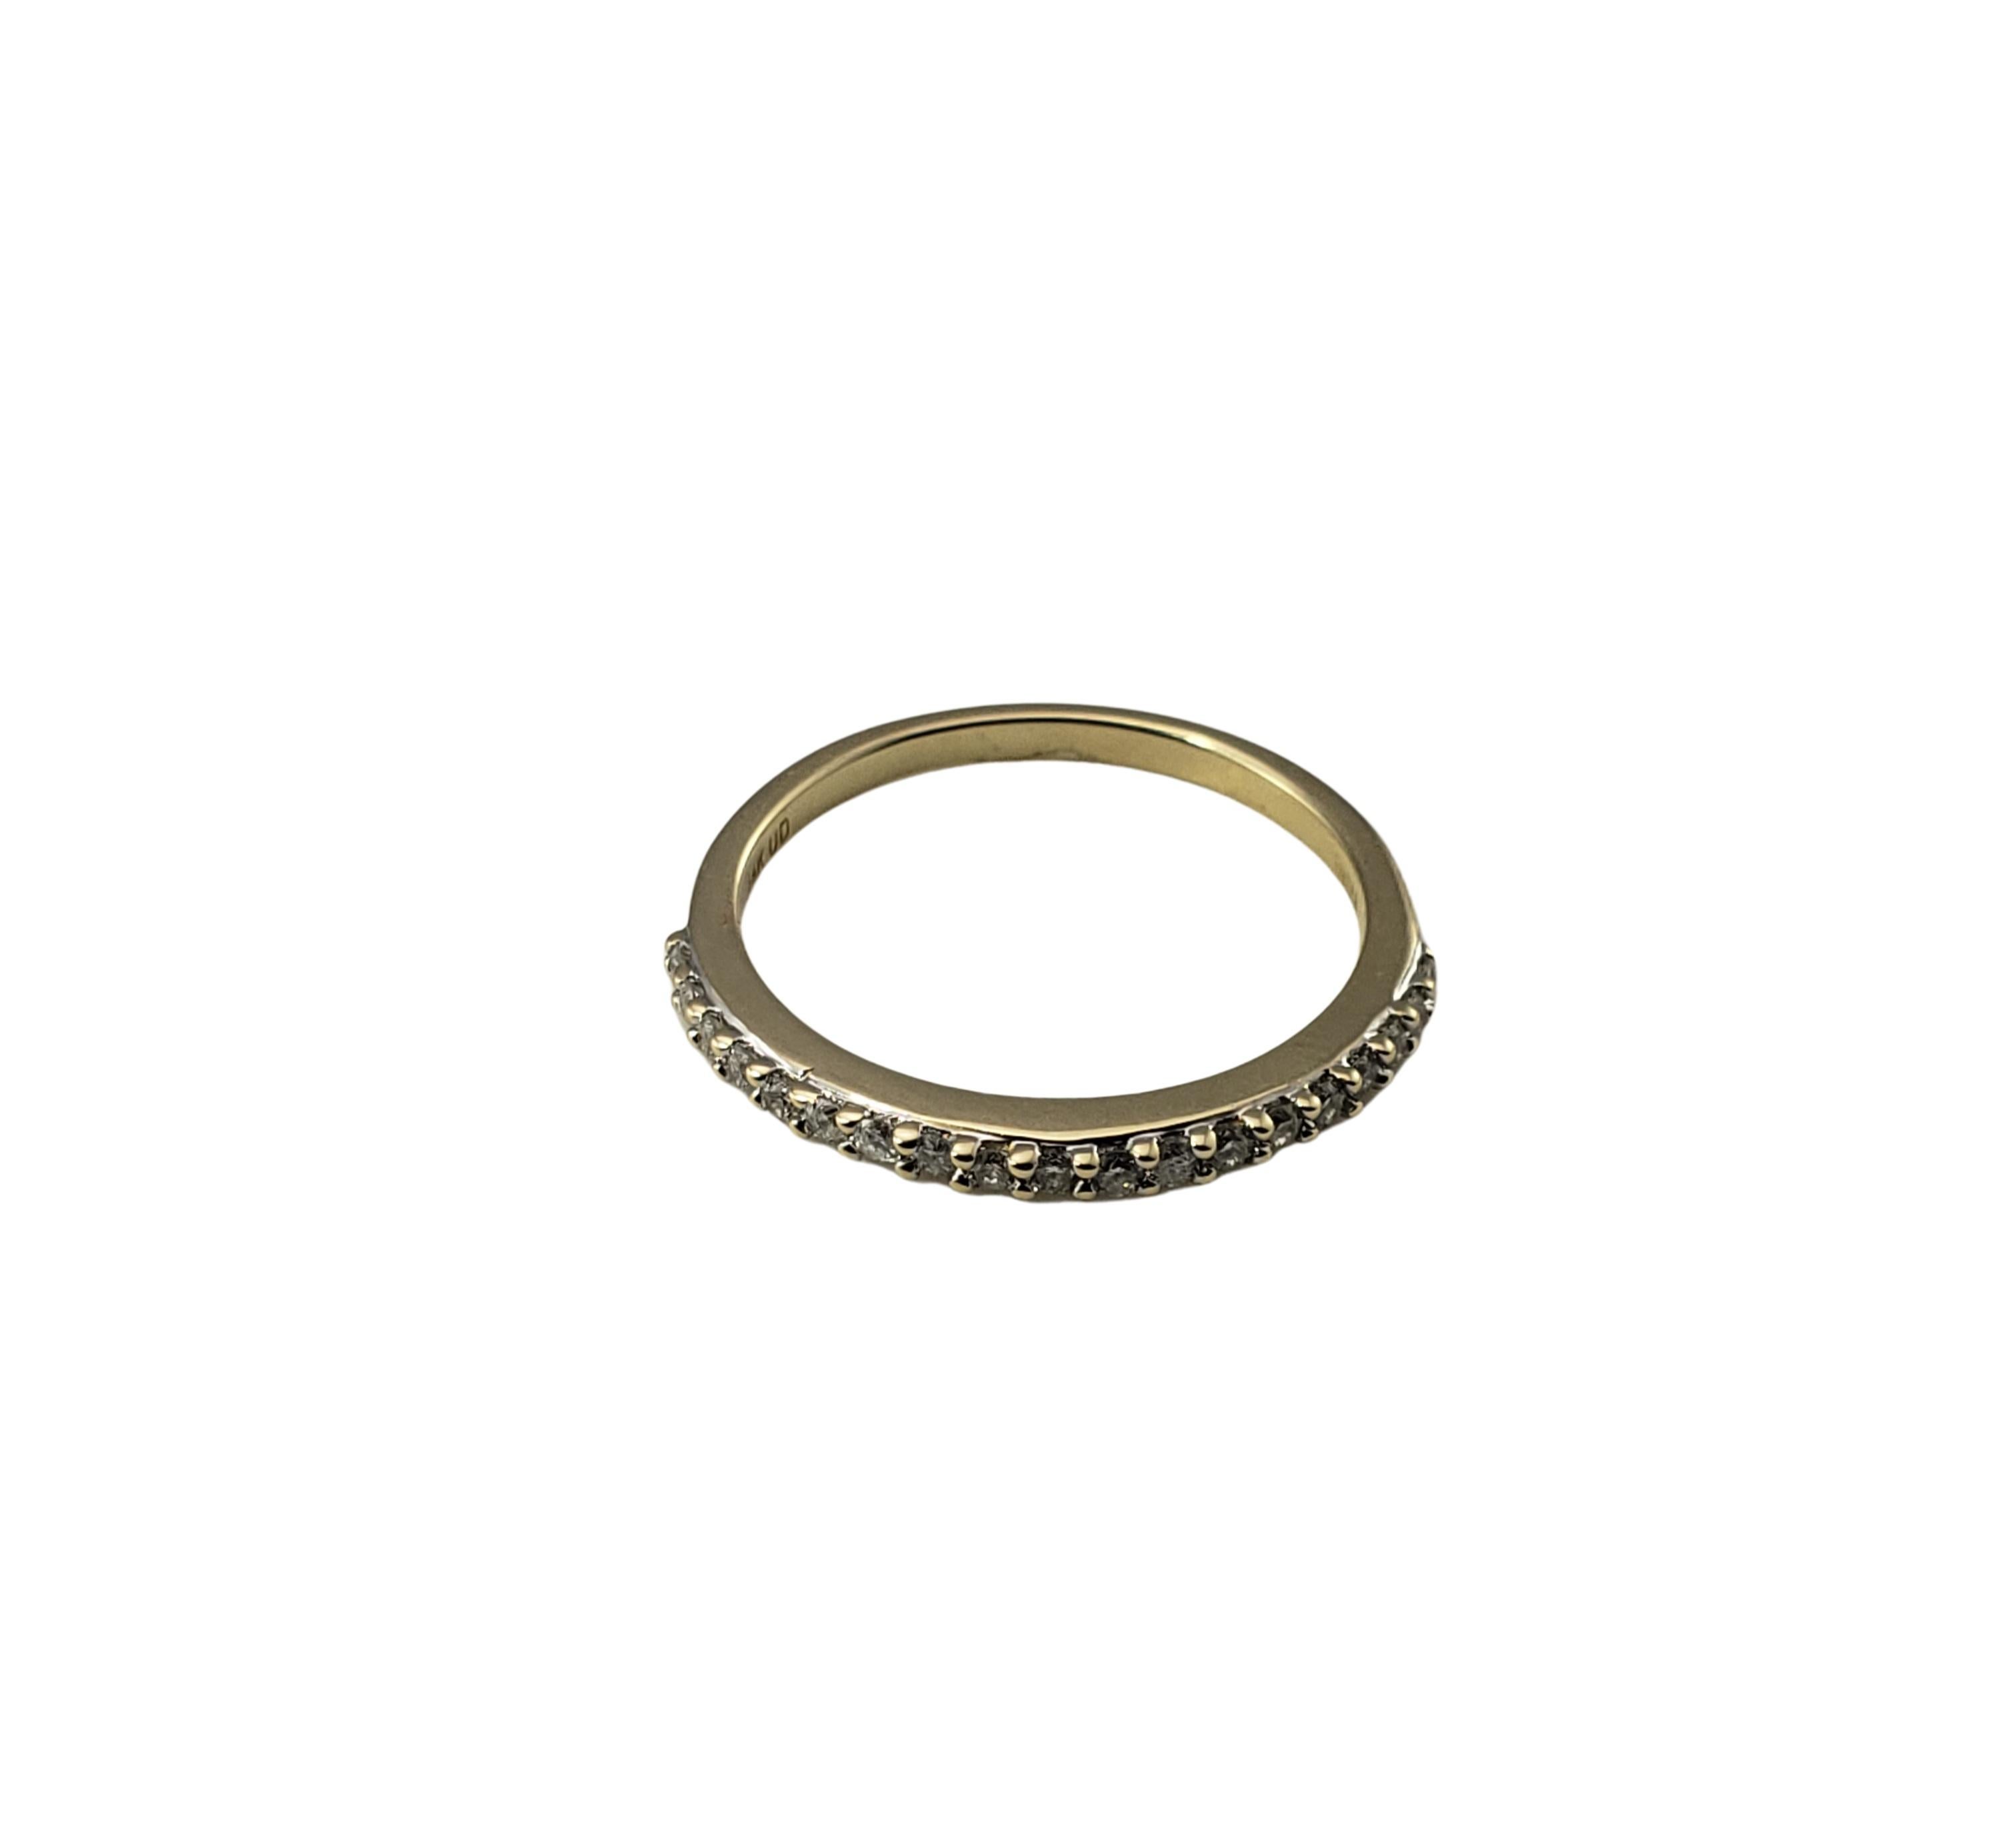 14 Karat Yellow Gold and Diamond Wedding Band Ring Size 6.25-

This sparkling band features 19 round brilliant cut diamonds set in classic 14K yellow gold.  Width:  1.5 mm.

Approximate total diamond weight:  20 ct.

Diamond color:  G-H

Diamond